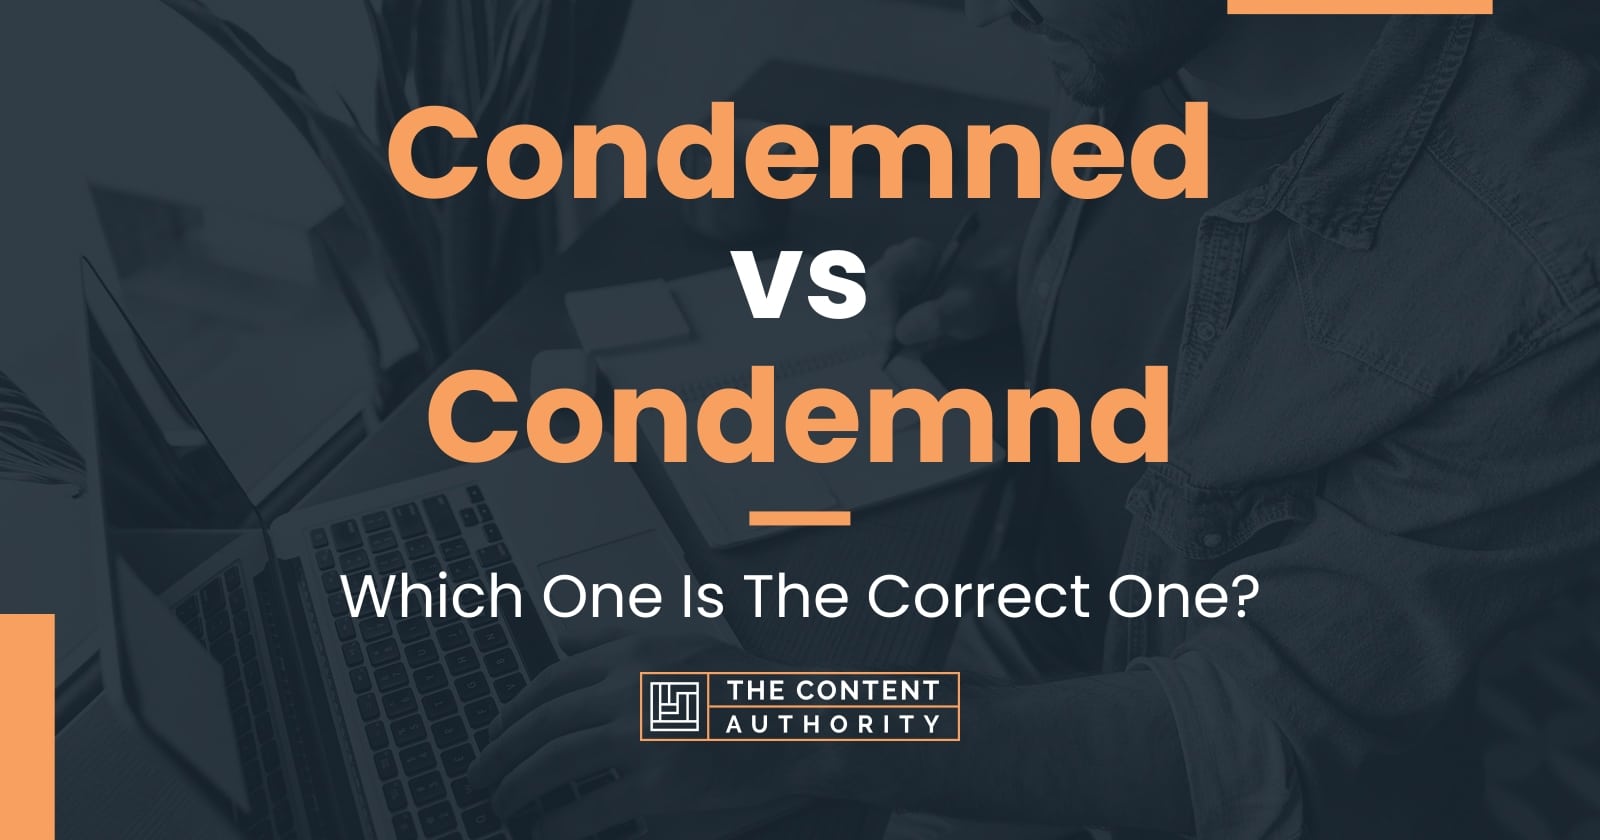 Condemned vs Condemnd: Which One Is The Correct One?